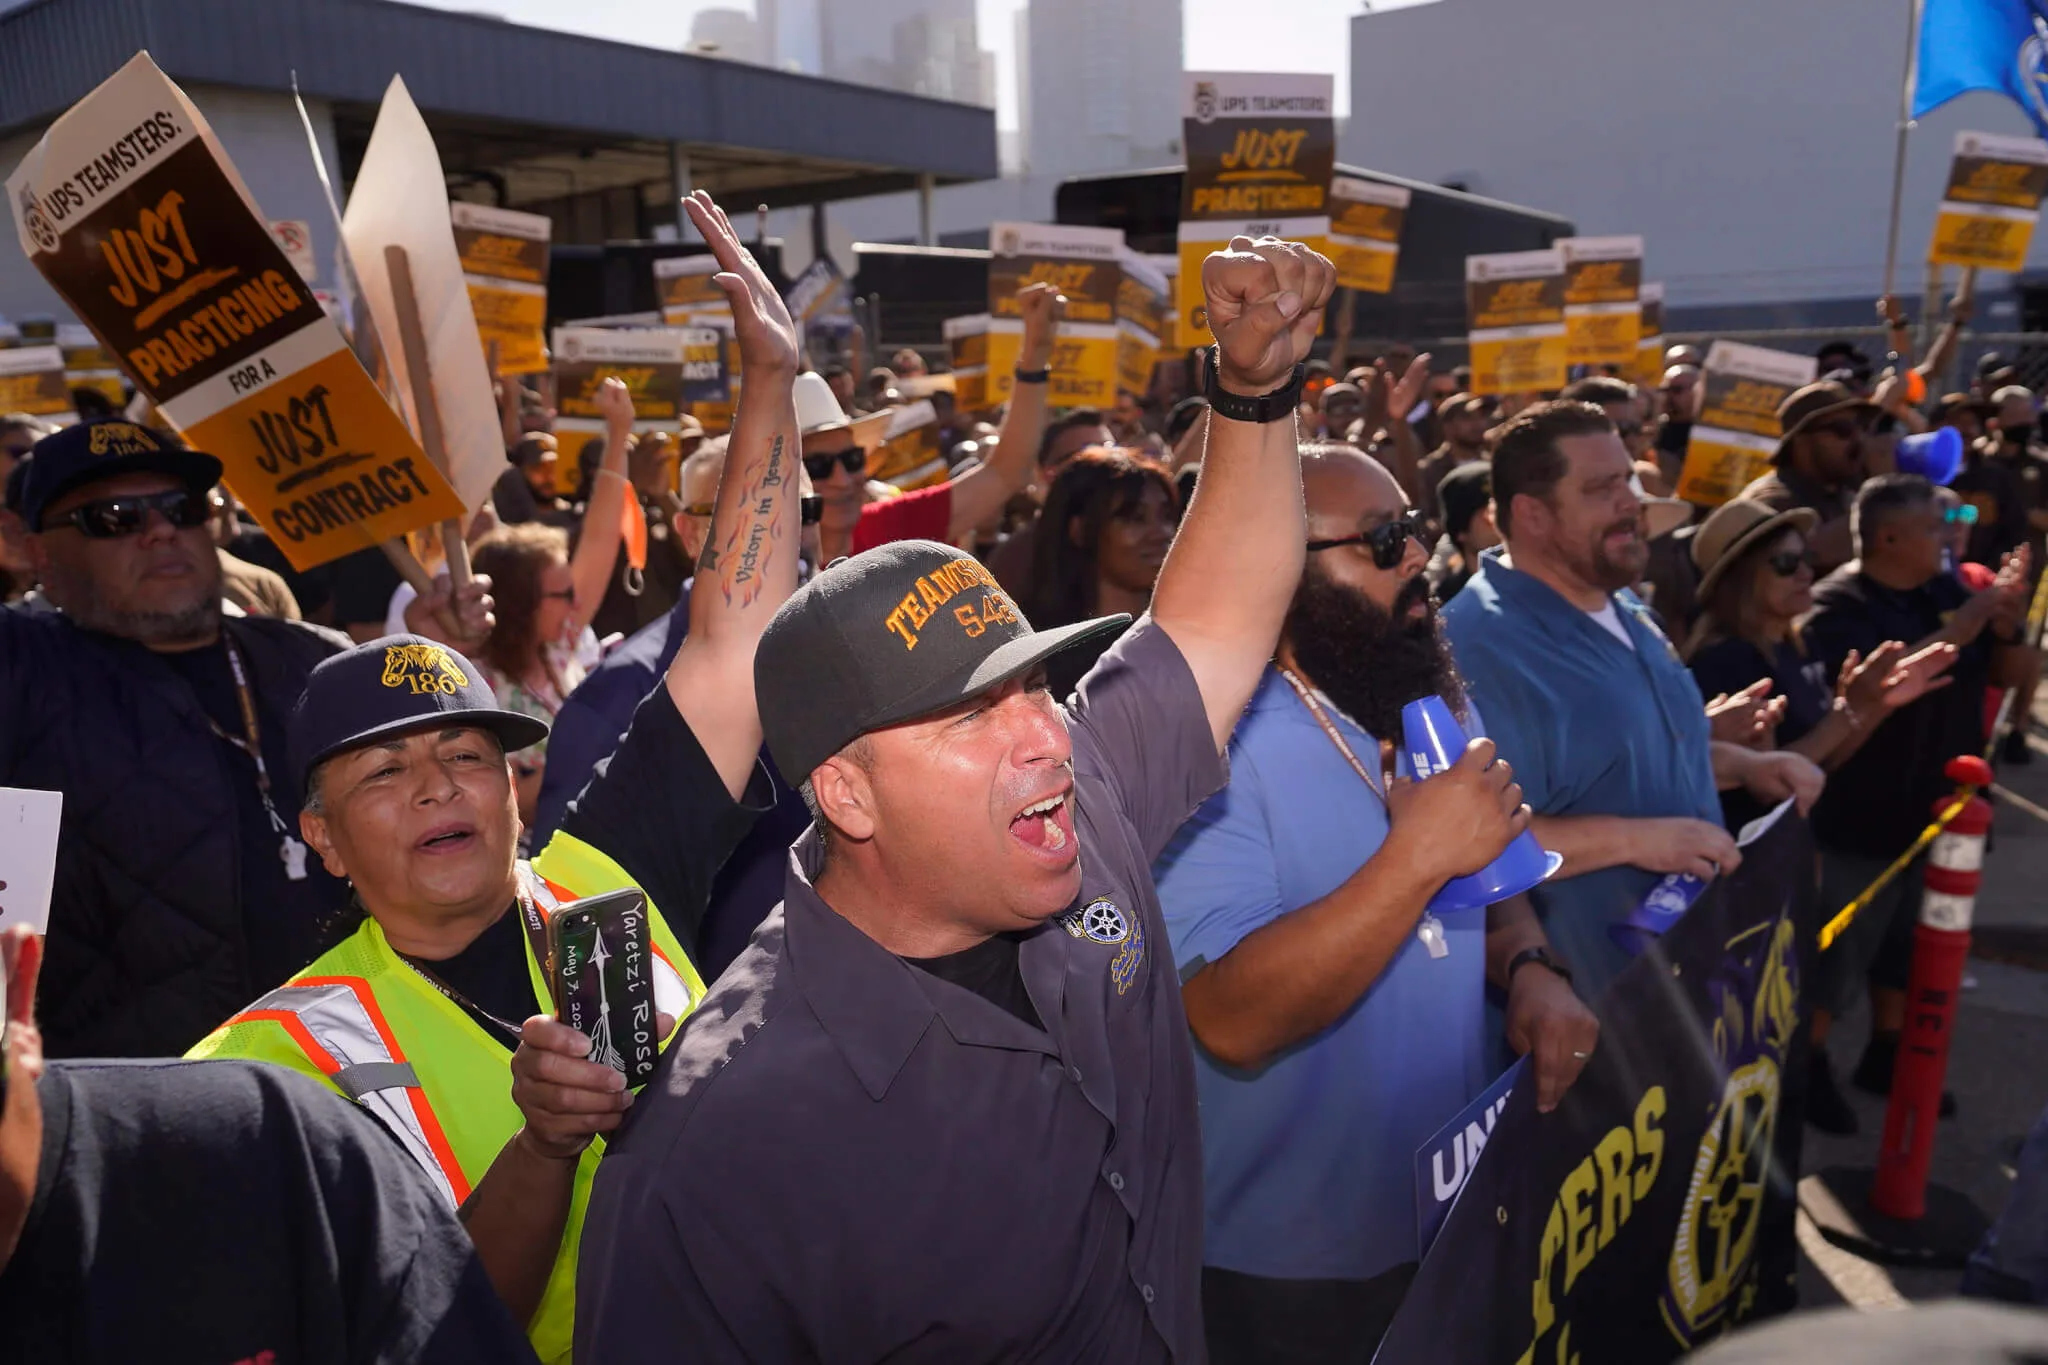 340,000 UPS Workers Could Strike on Aug. 1—Here’s Why